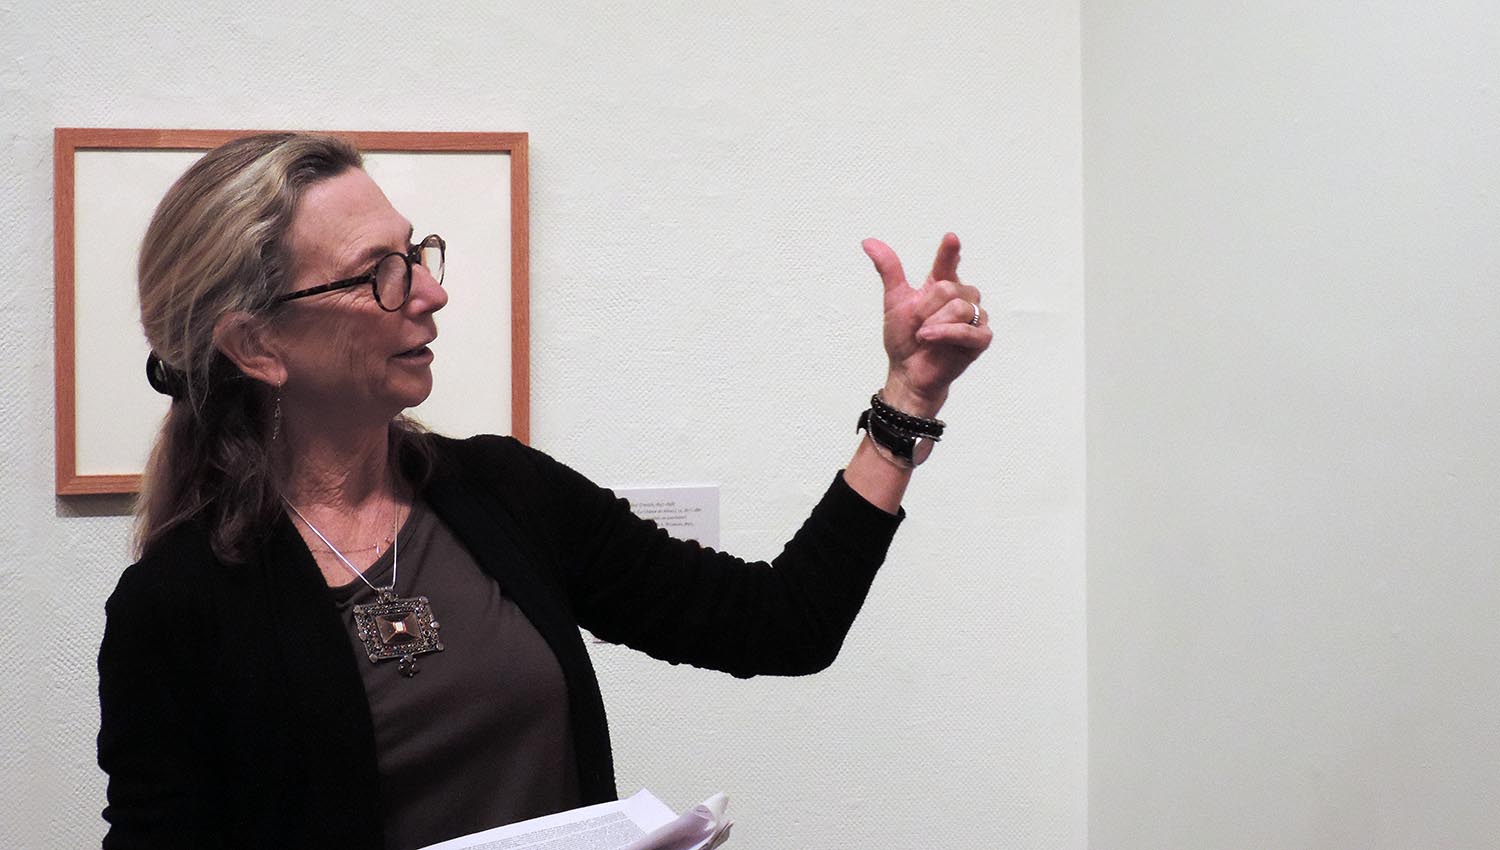 The opening gallery talk was delivered by Kari Weil, University Professor, Environmental Studies, College of the Environment and College of Letters, Co-Coordinator for Animals Studies, and author of "Thinking Animals: Why Animal Studies Now" (Columbia, 2012).